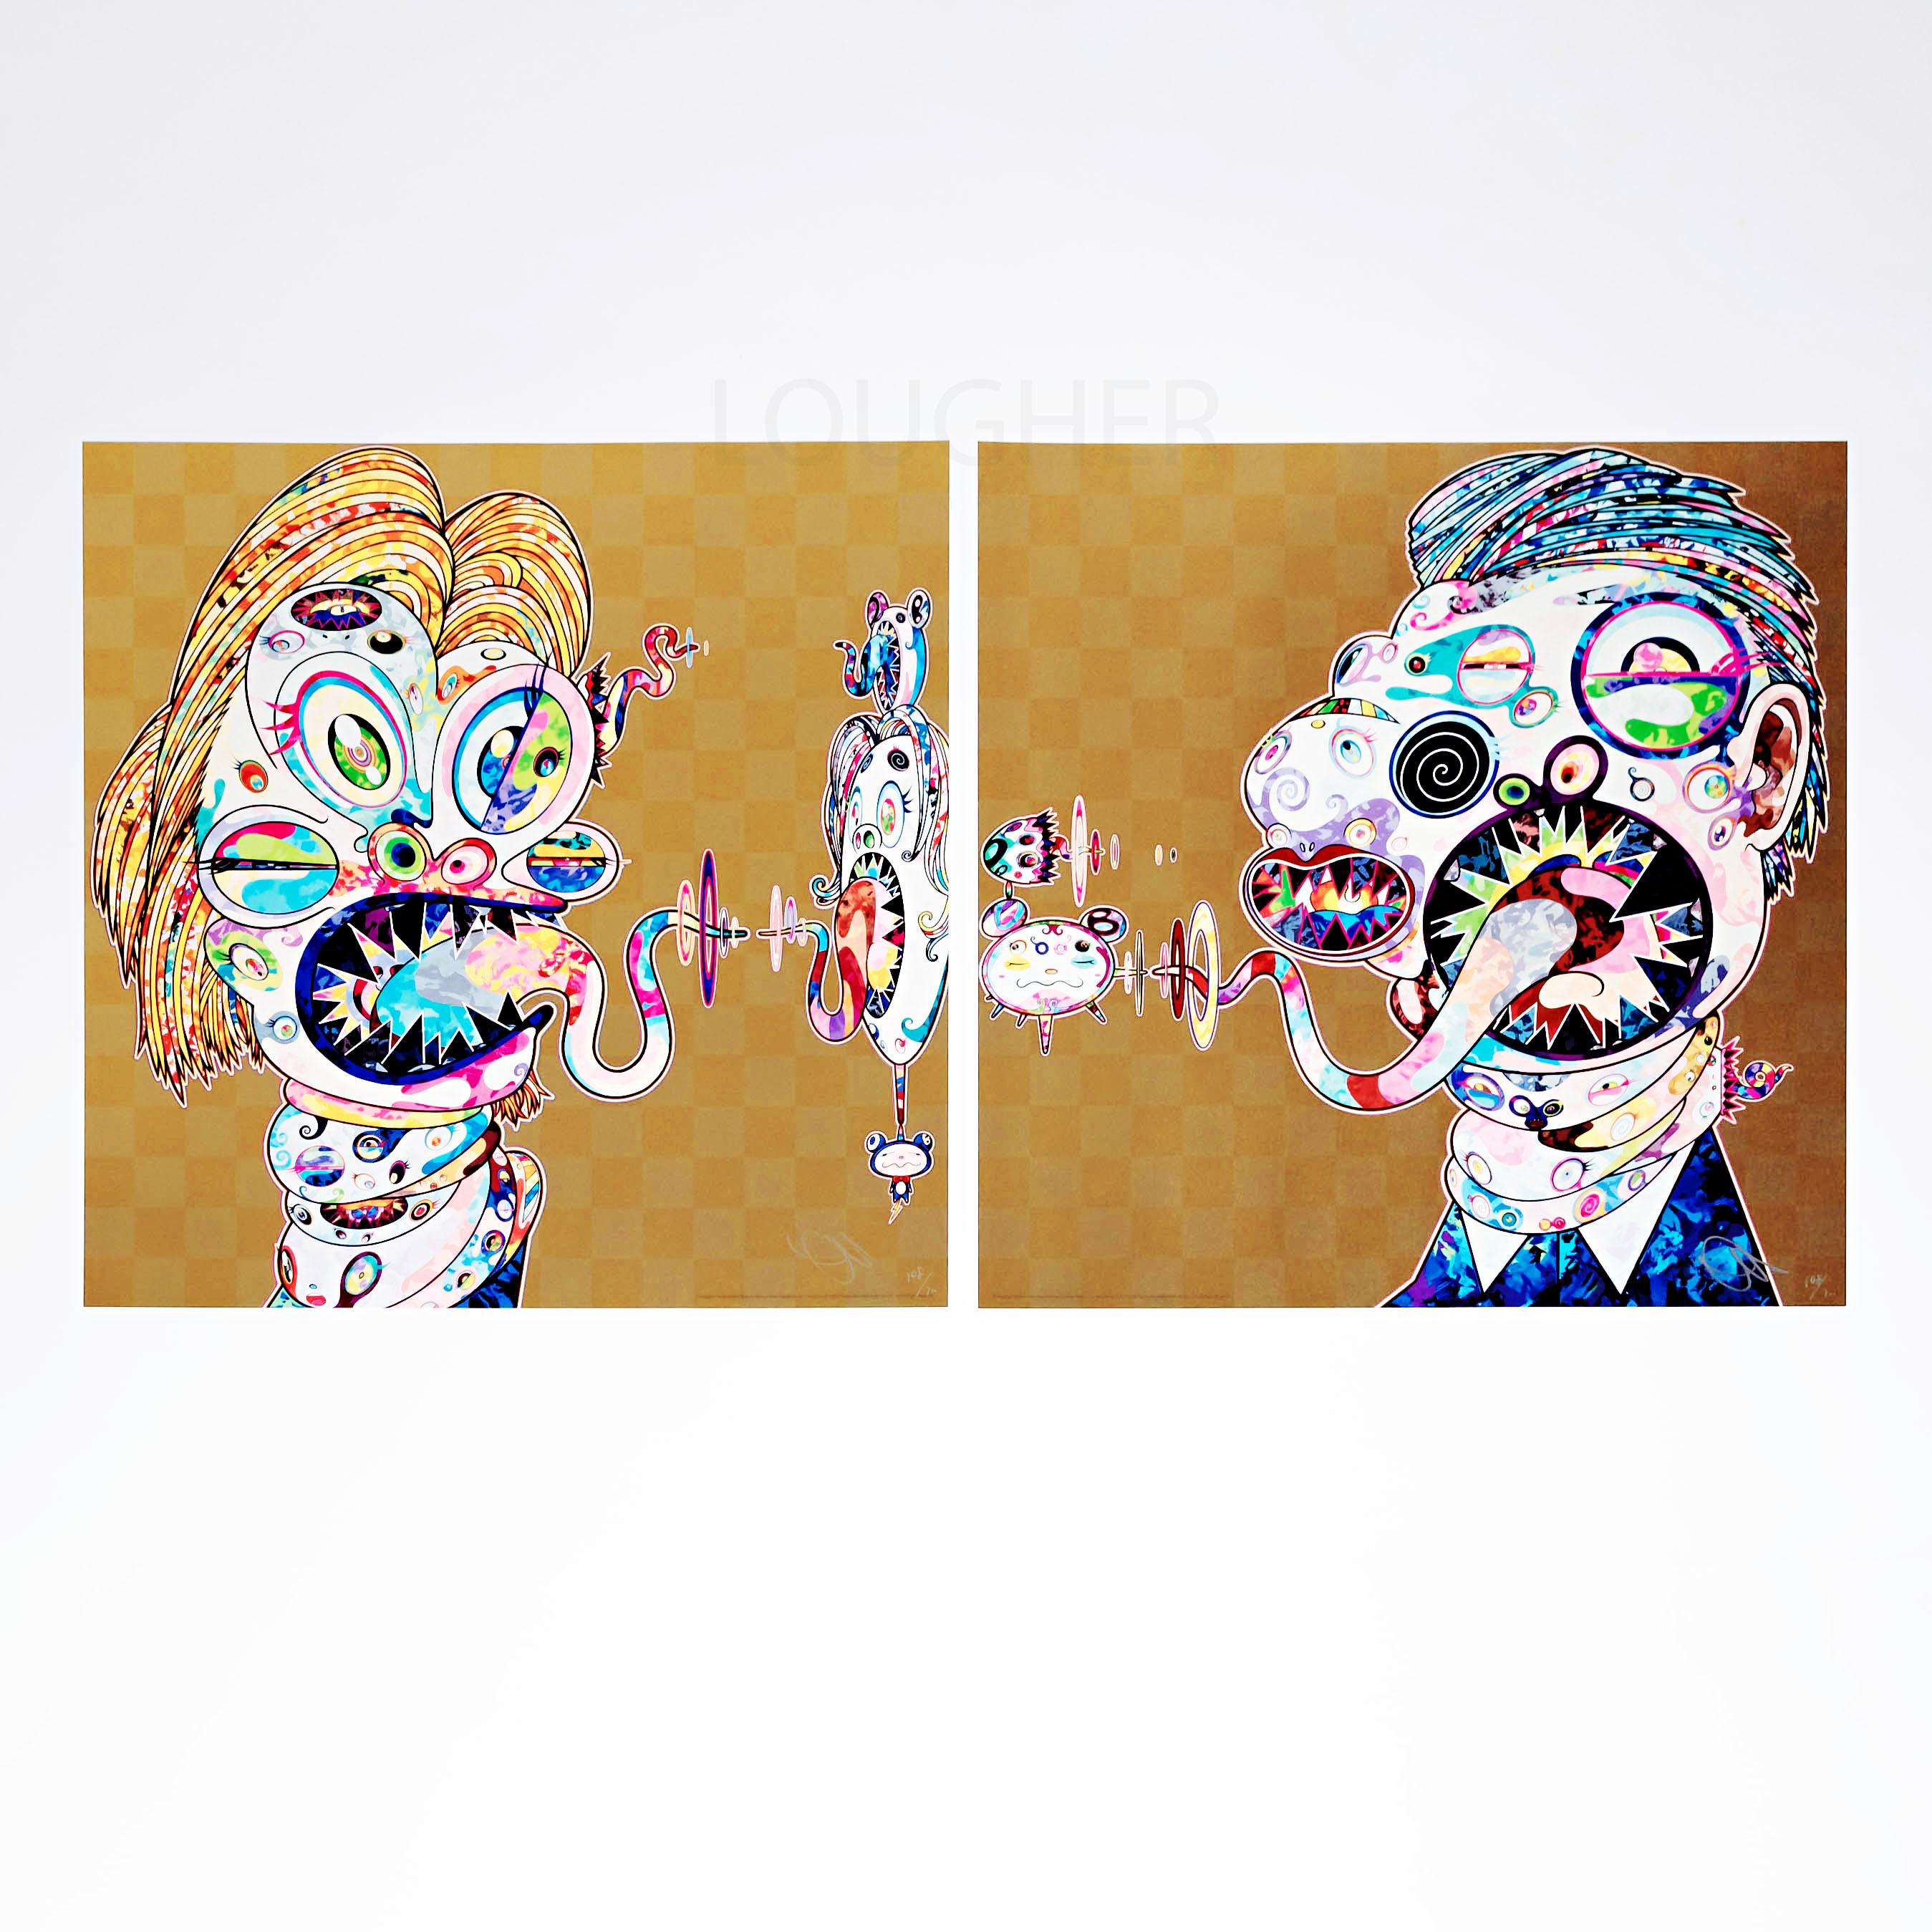 Homage to Francis Bacon (Study for Head of Isabel Rawsthorne and George Dyer) - Print by Takashi Murakami